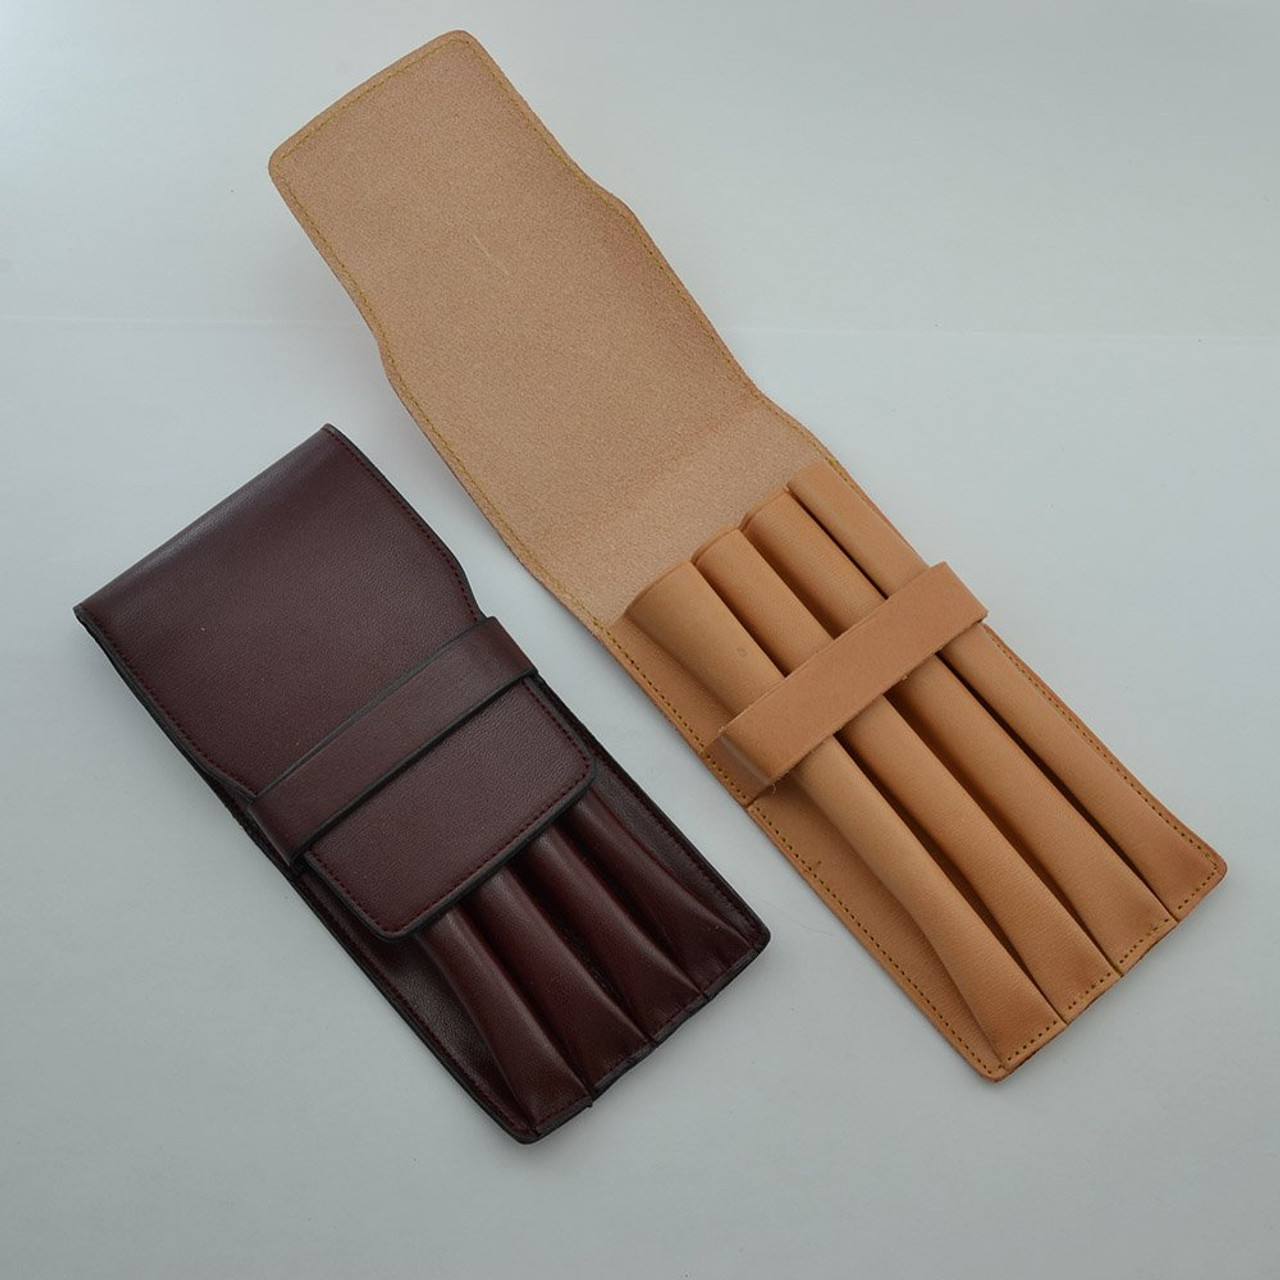 Leather Pen Case for Four Pens by Lamy (New)